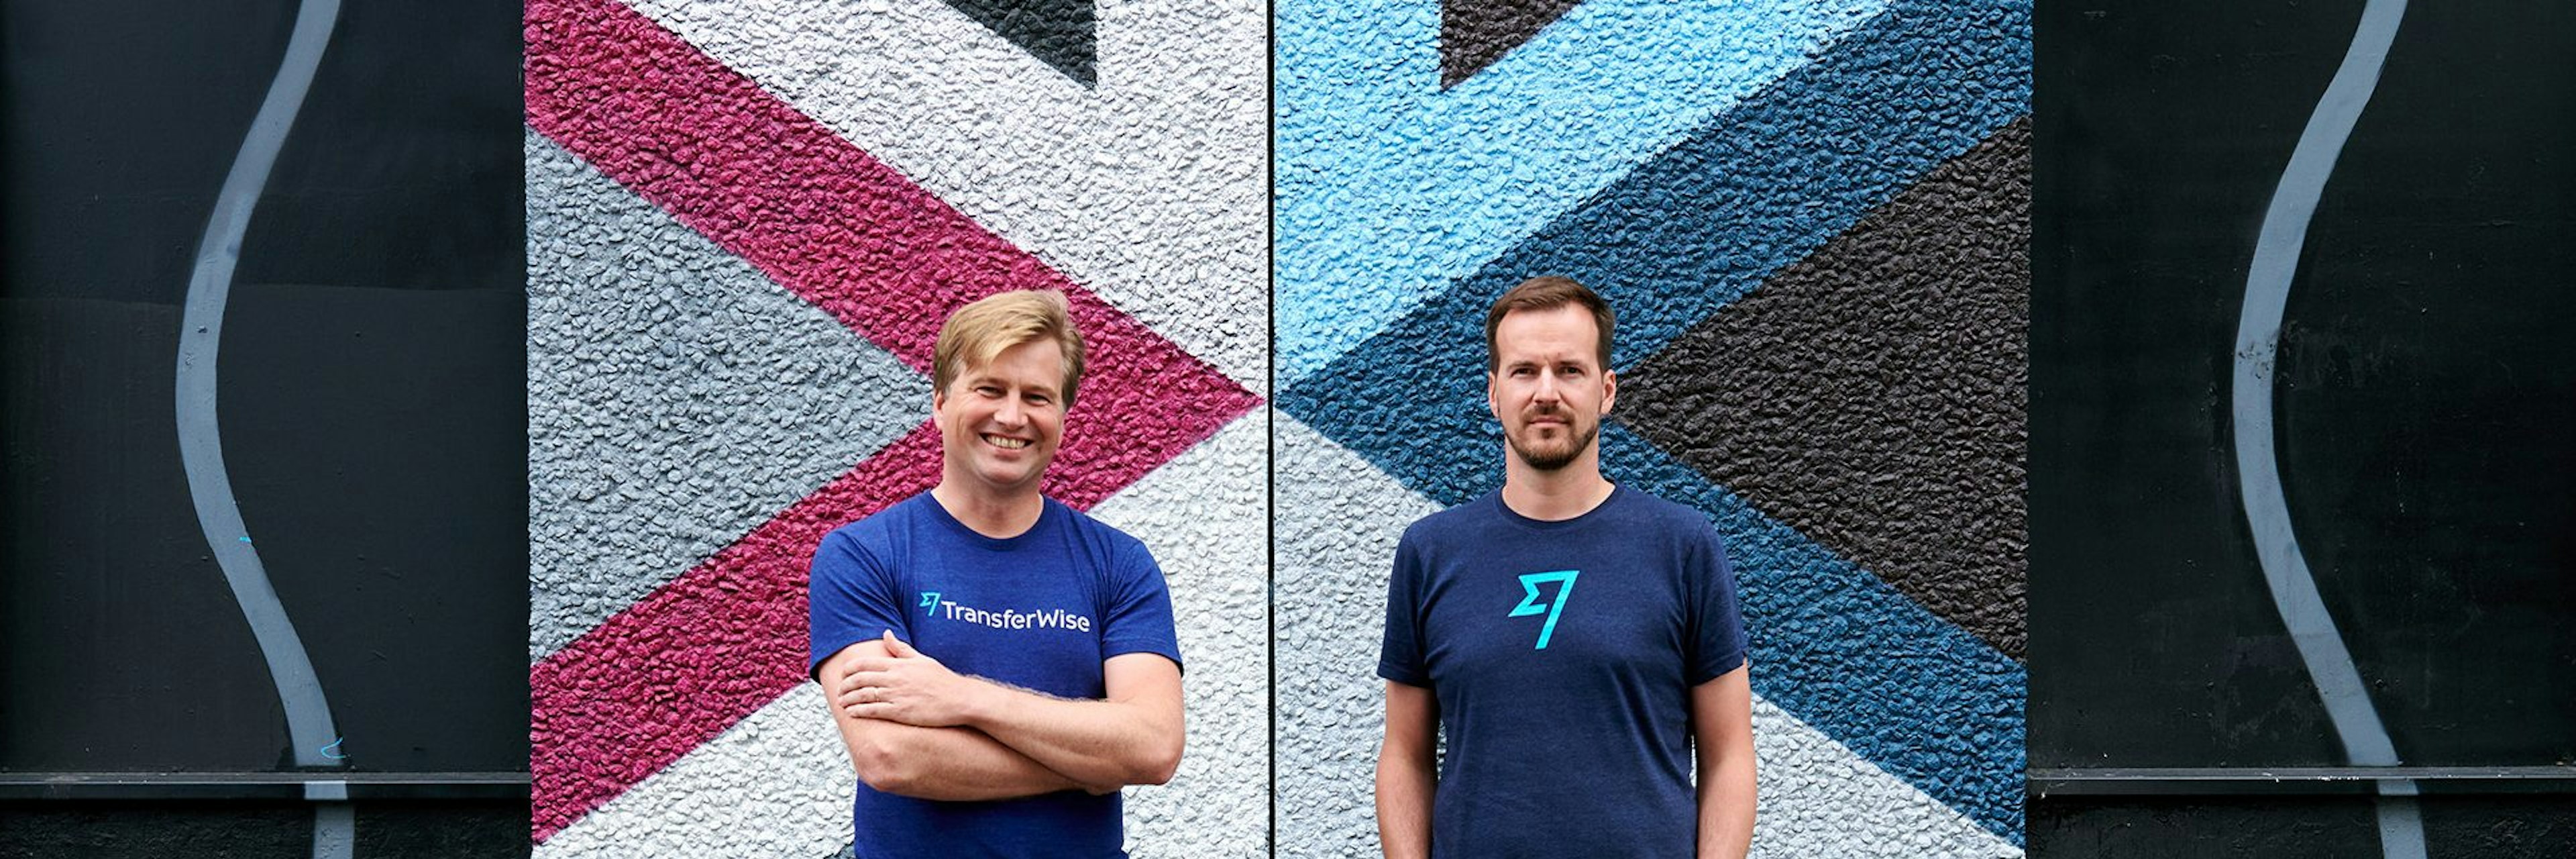 An image of the cofounders of Wise Krito Kaarmann and Taavet Hinrikus